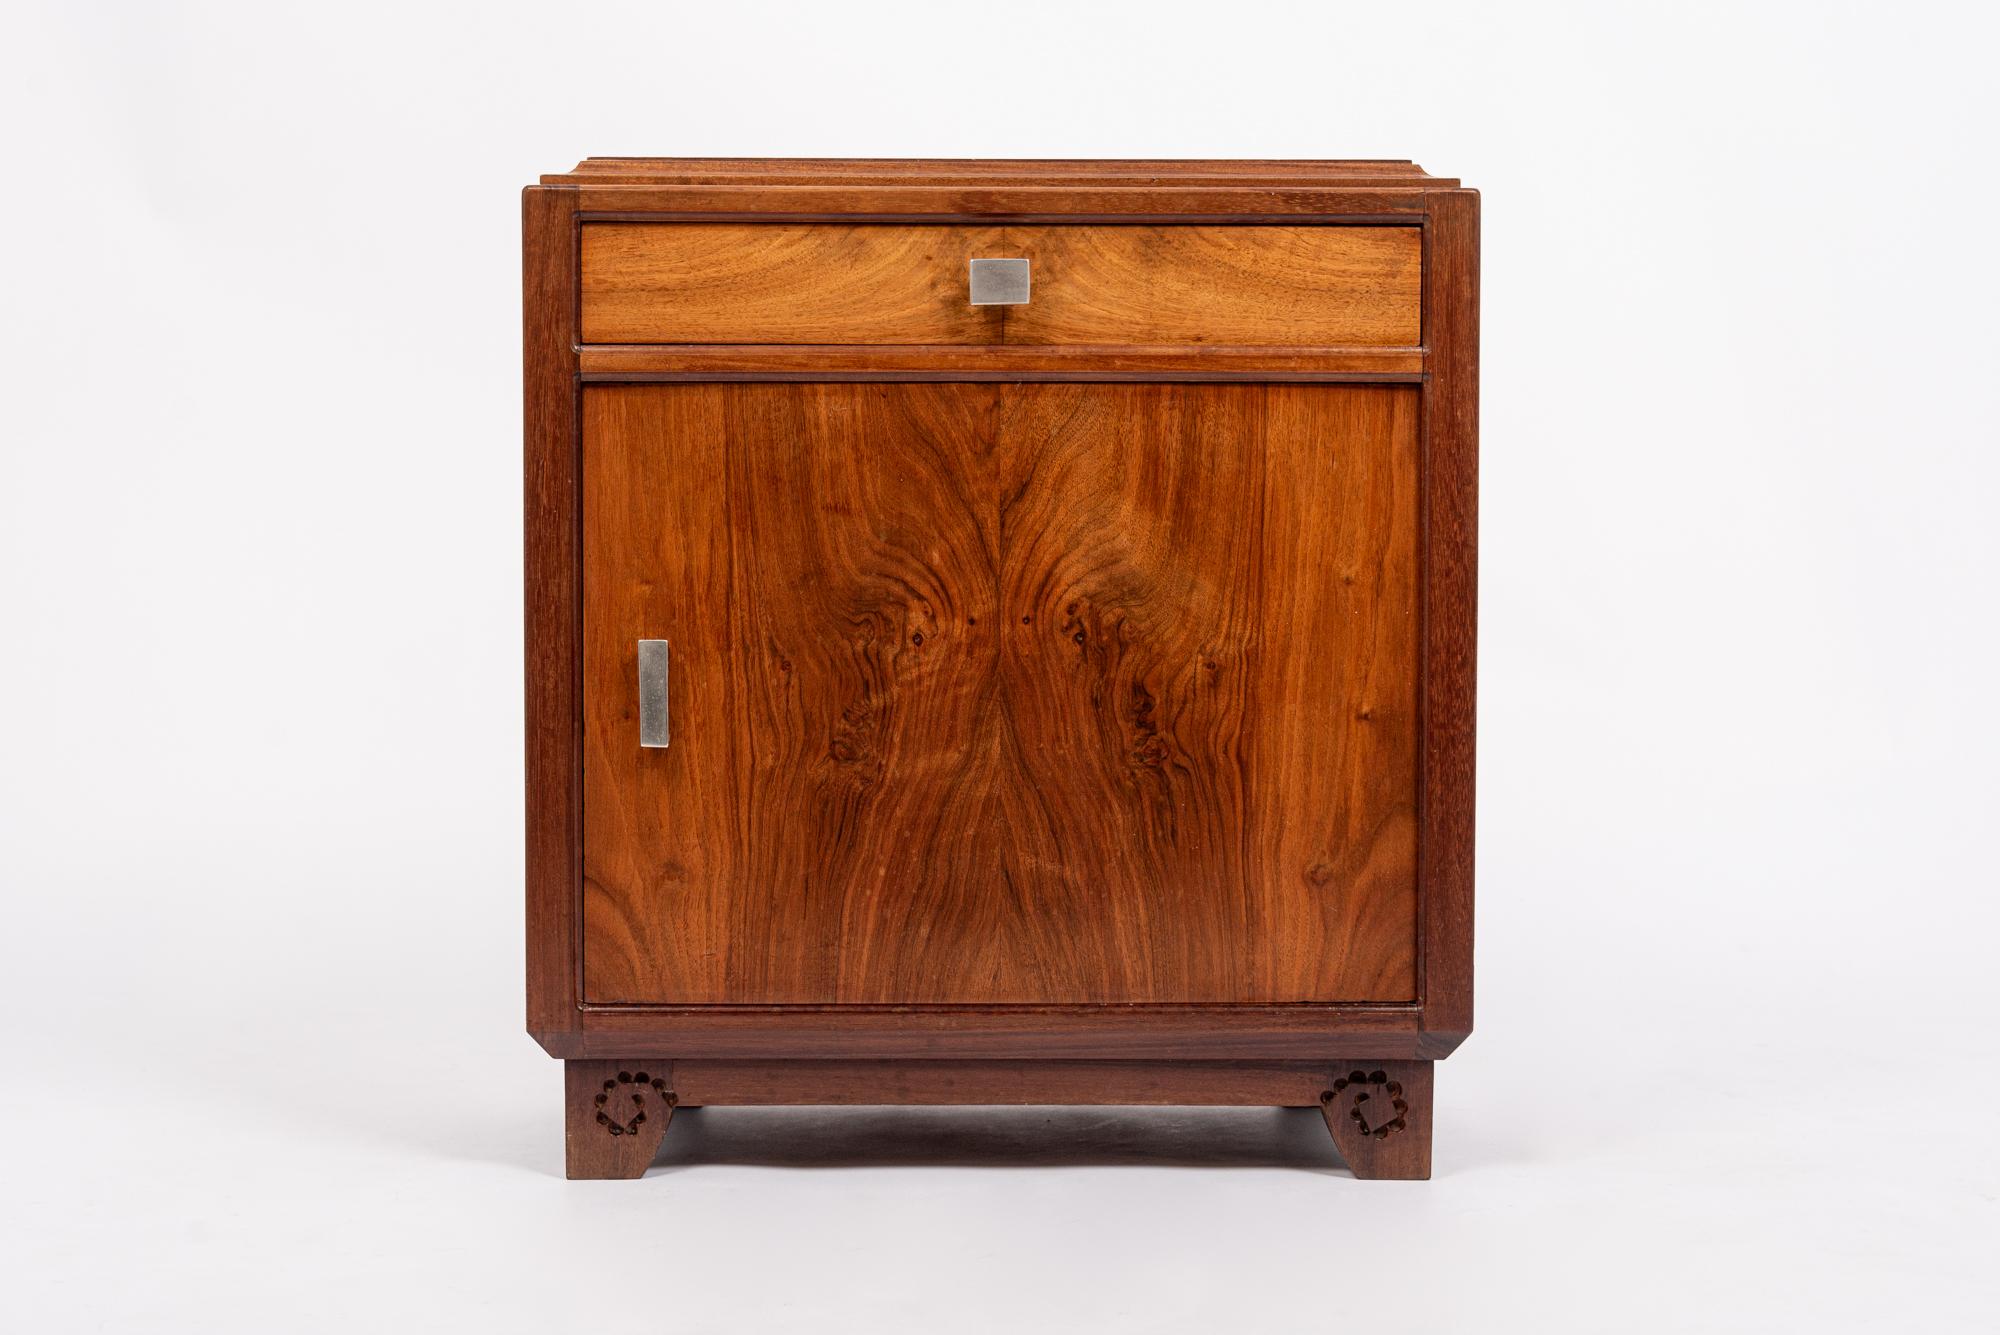 This lovely antique French Art Nouveau wood commode or nightstand was designed by Louis Majorelle and made in Nancy, France circa 1910-1920. This exceptional, museum-quality cabinet exemplifies elegant, Art Nouveau design. It is expertly crafted